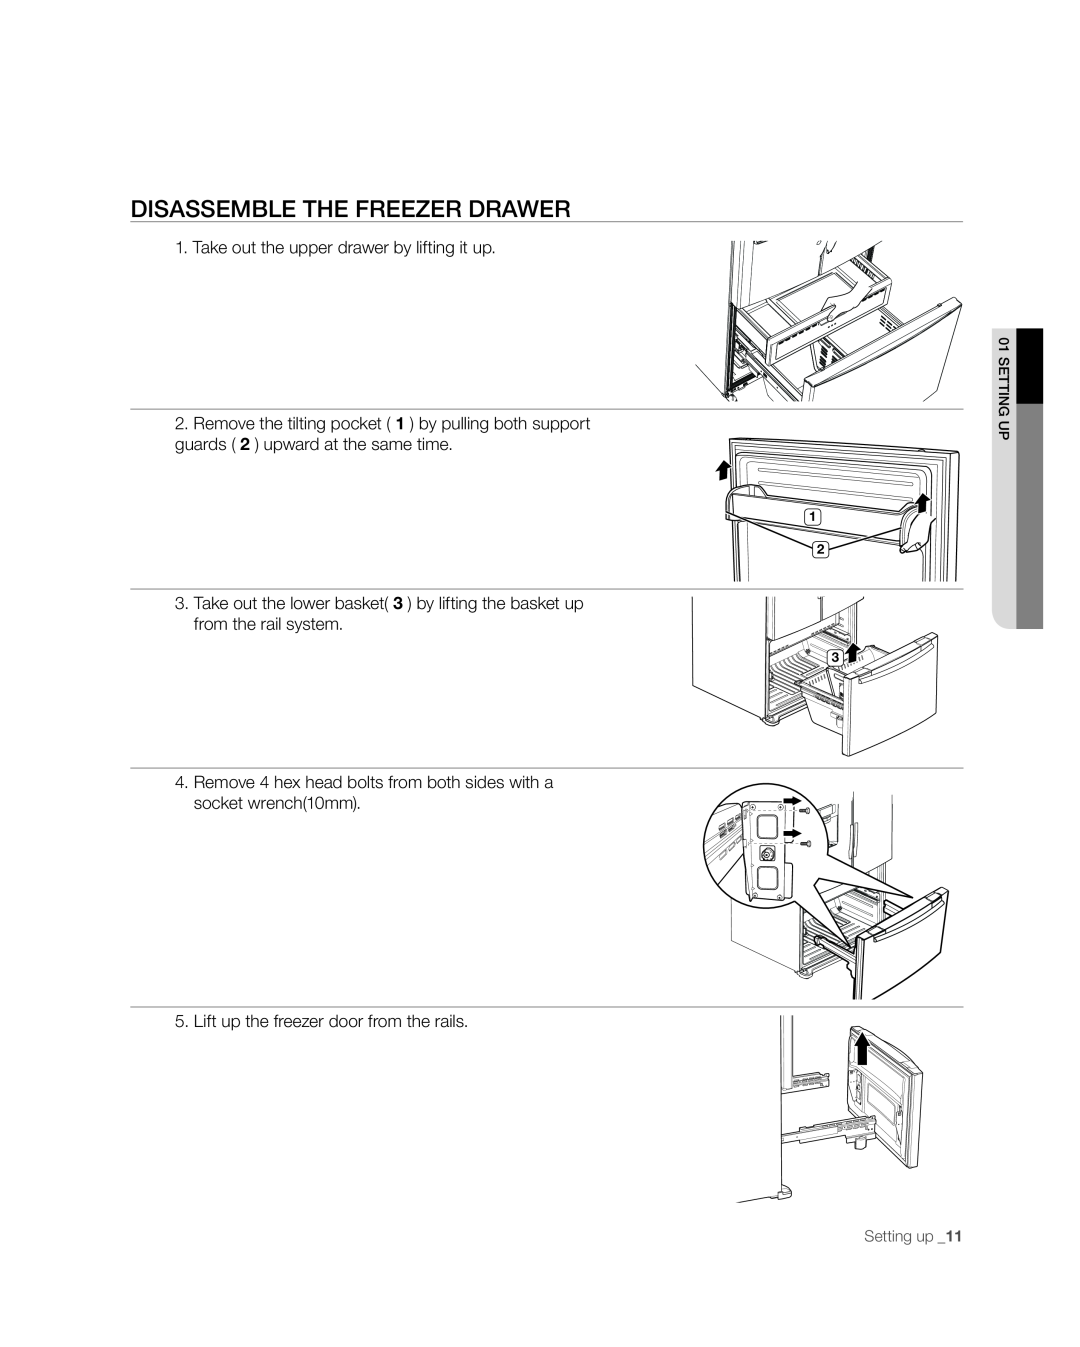 Samsung RF268** user manual Disassemble The Freezer Drawer, Take out the upper drawer by lifting it up, Setting up 